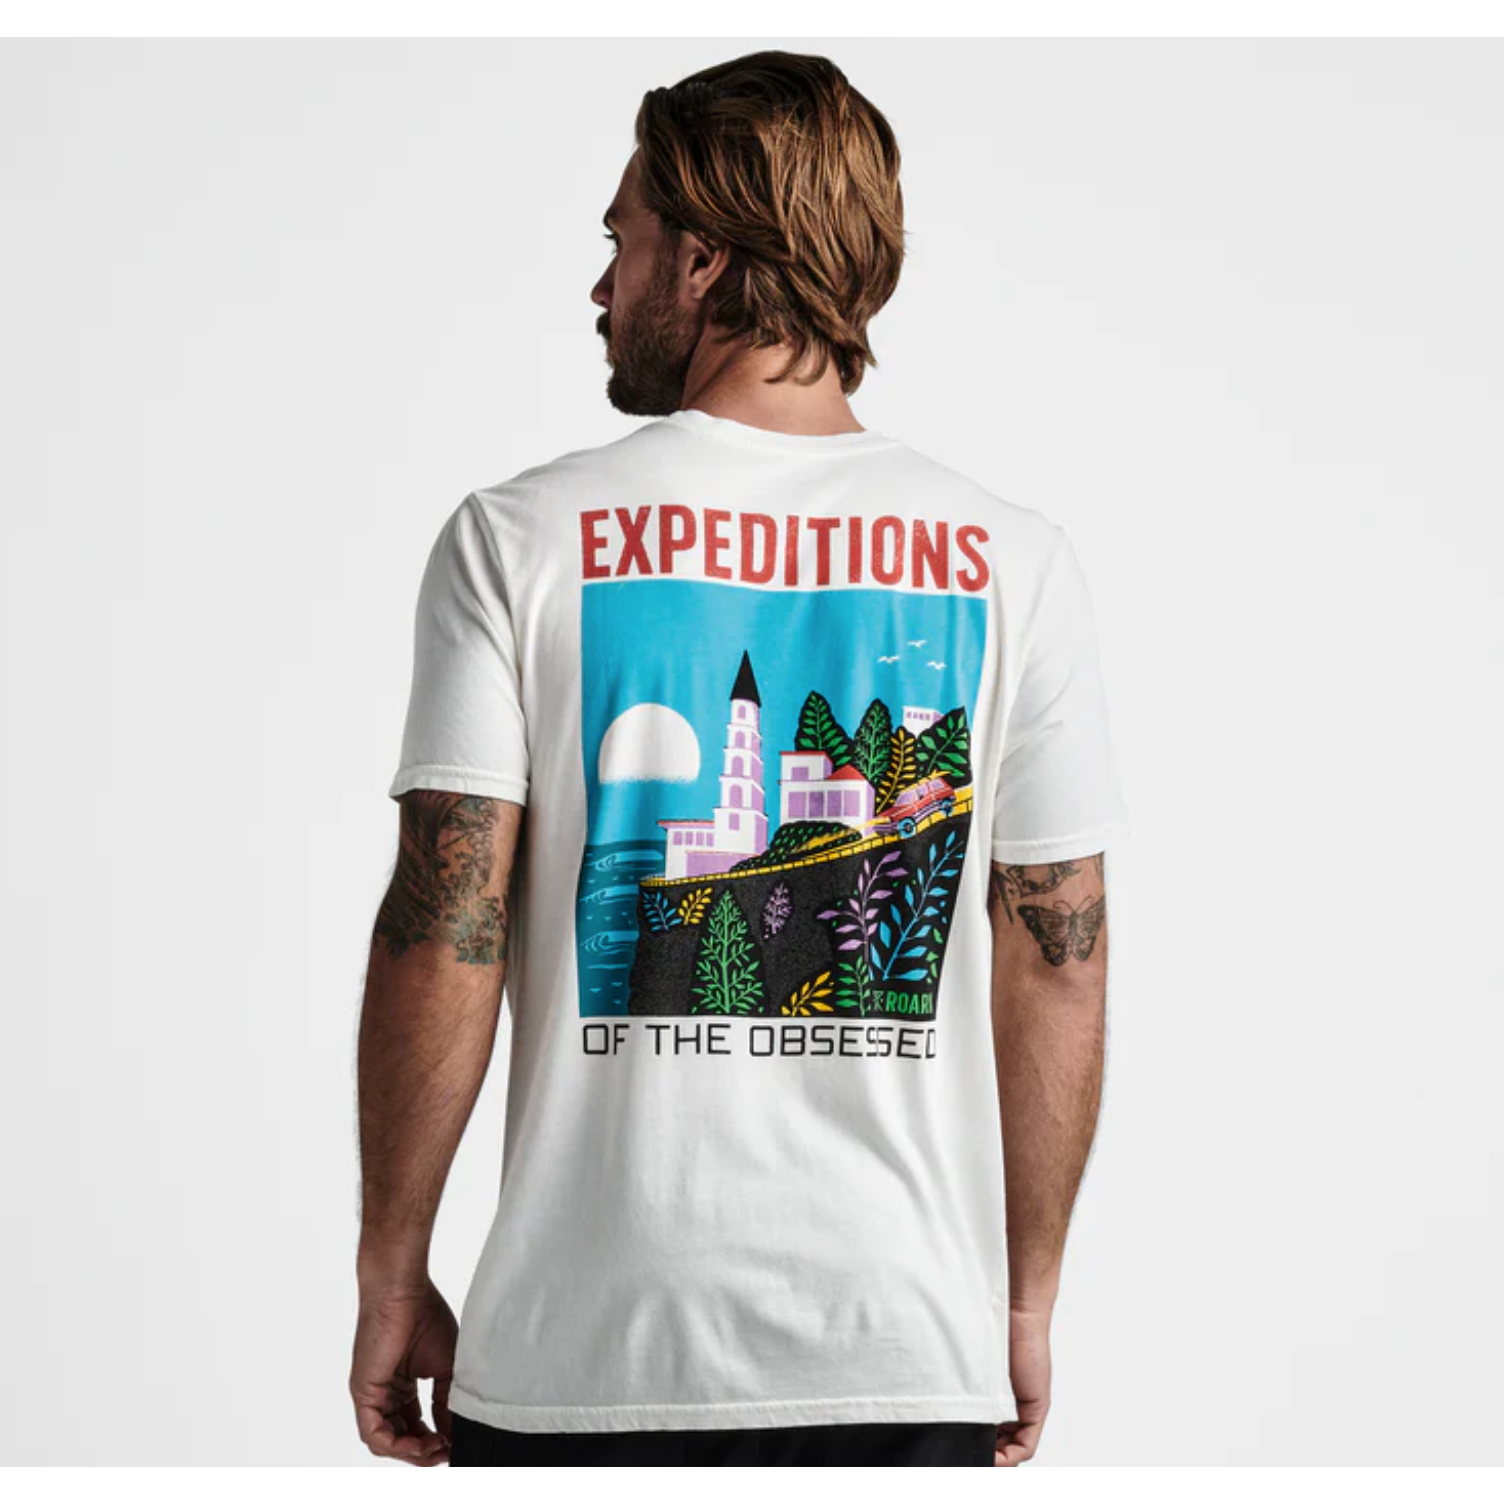 T-Shirt Expeditions of the Obsessed pour Hommes||Expeditions of the Obsessed Tee for Men's